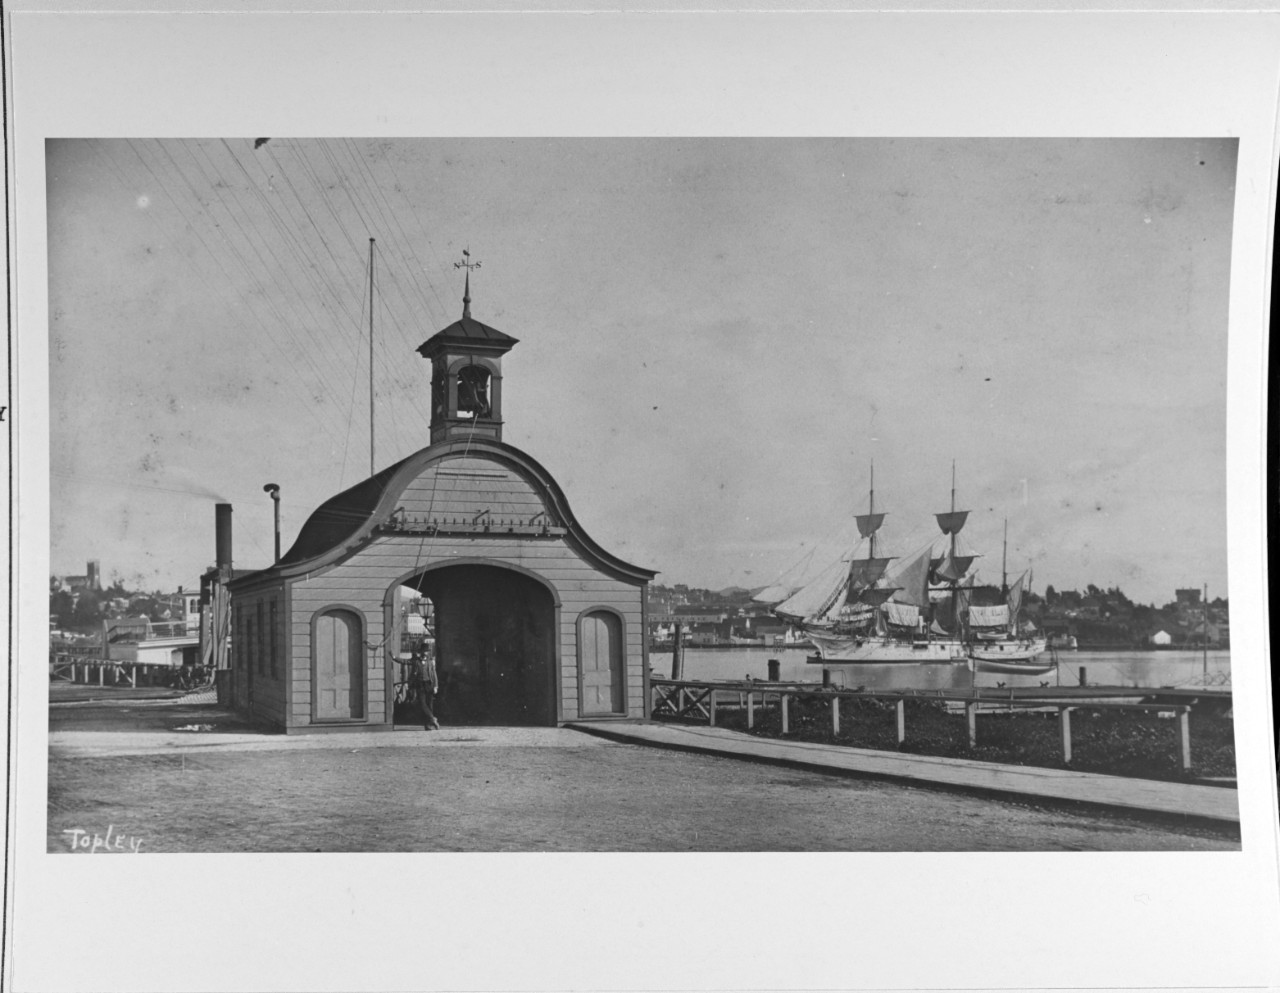 The old ferry house at Mare Island, California, about 1892.